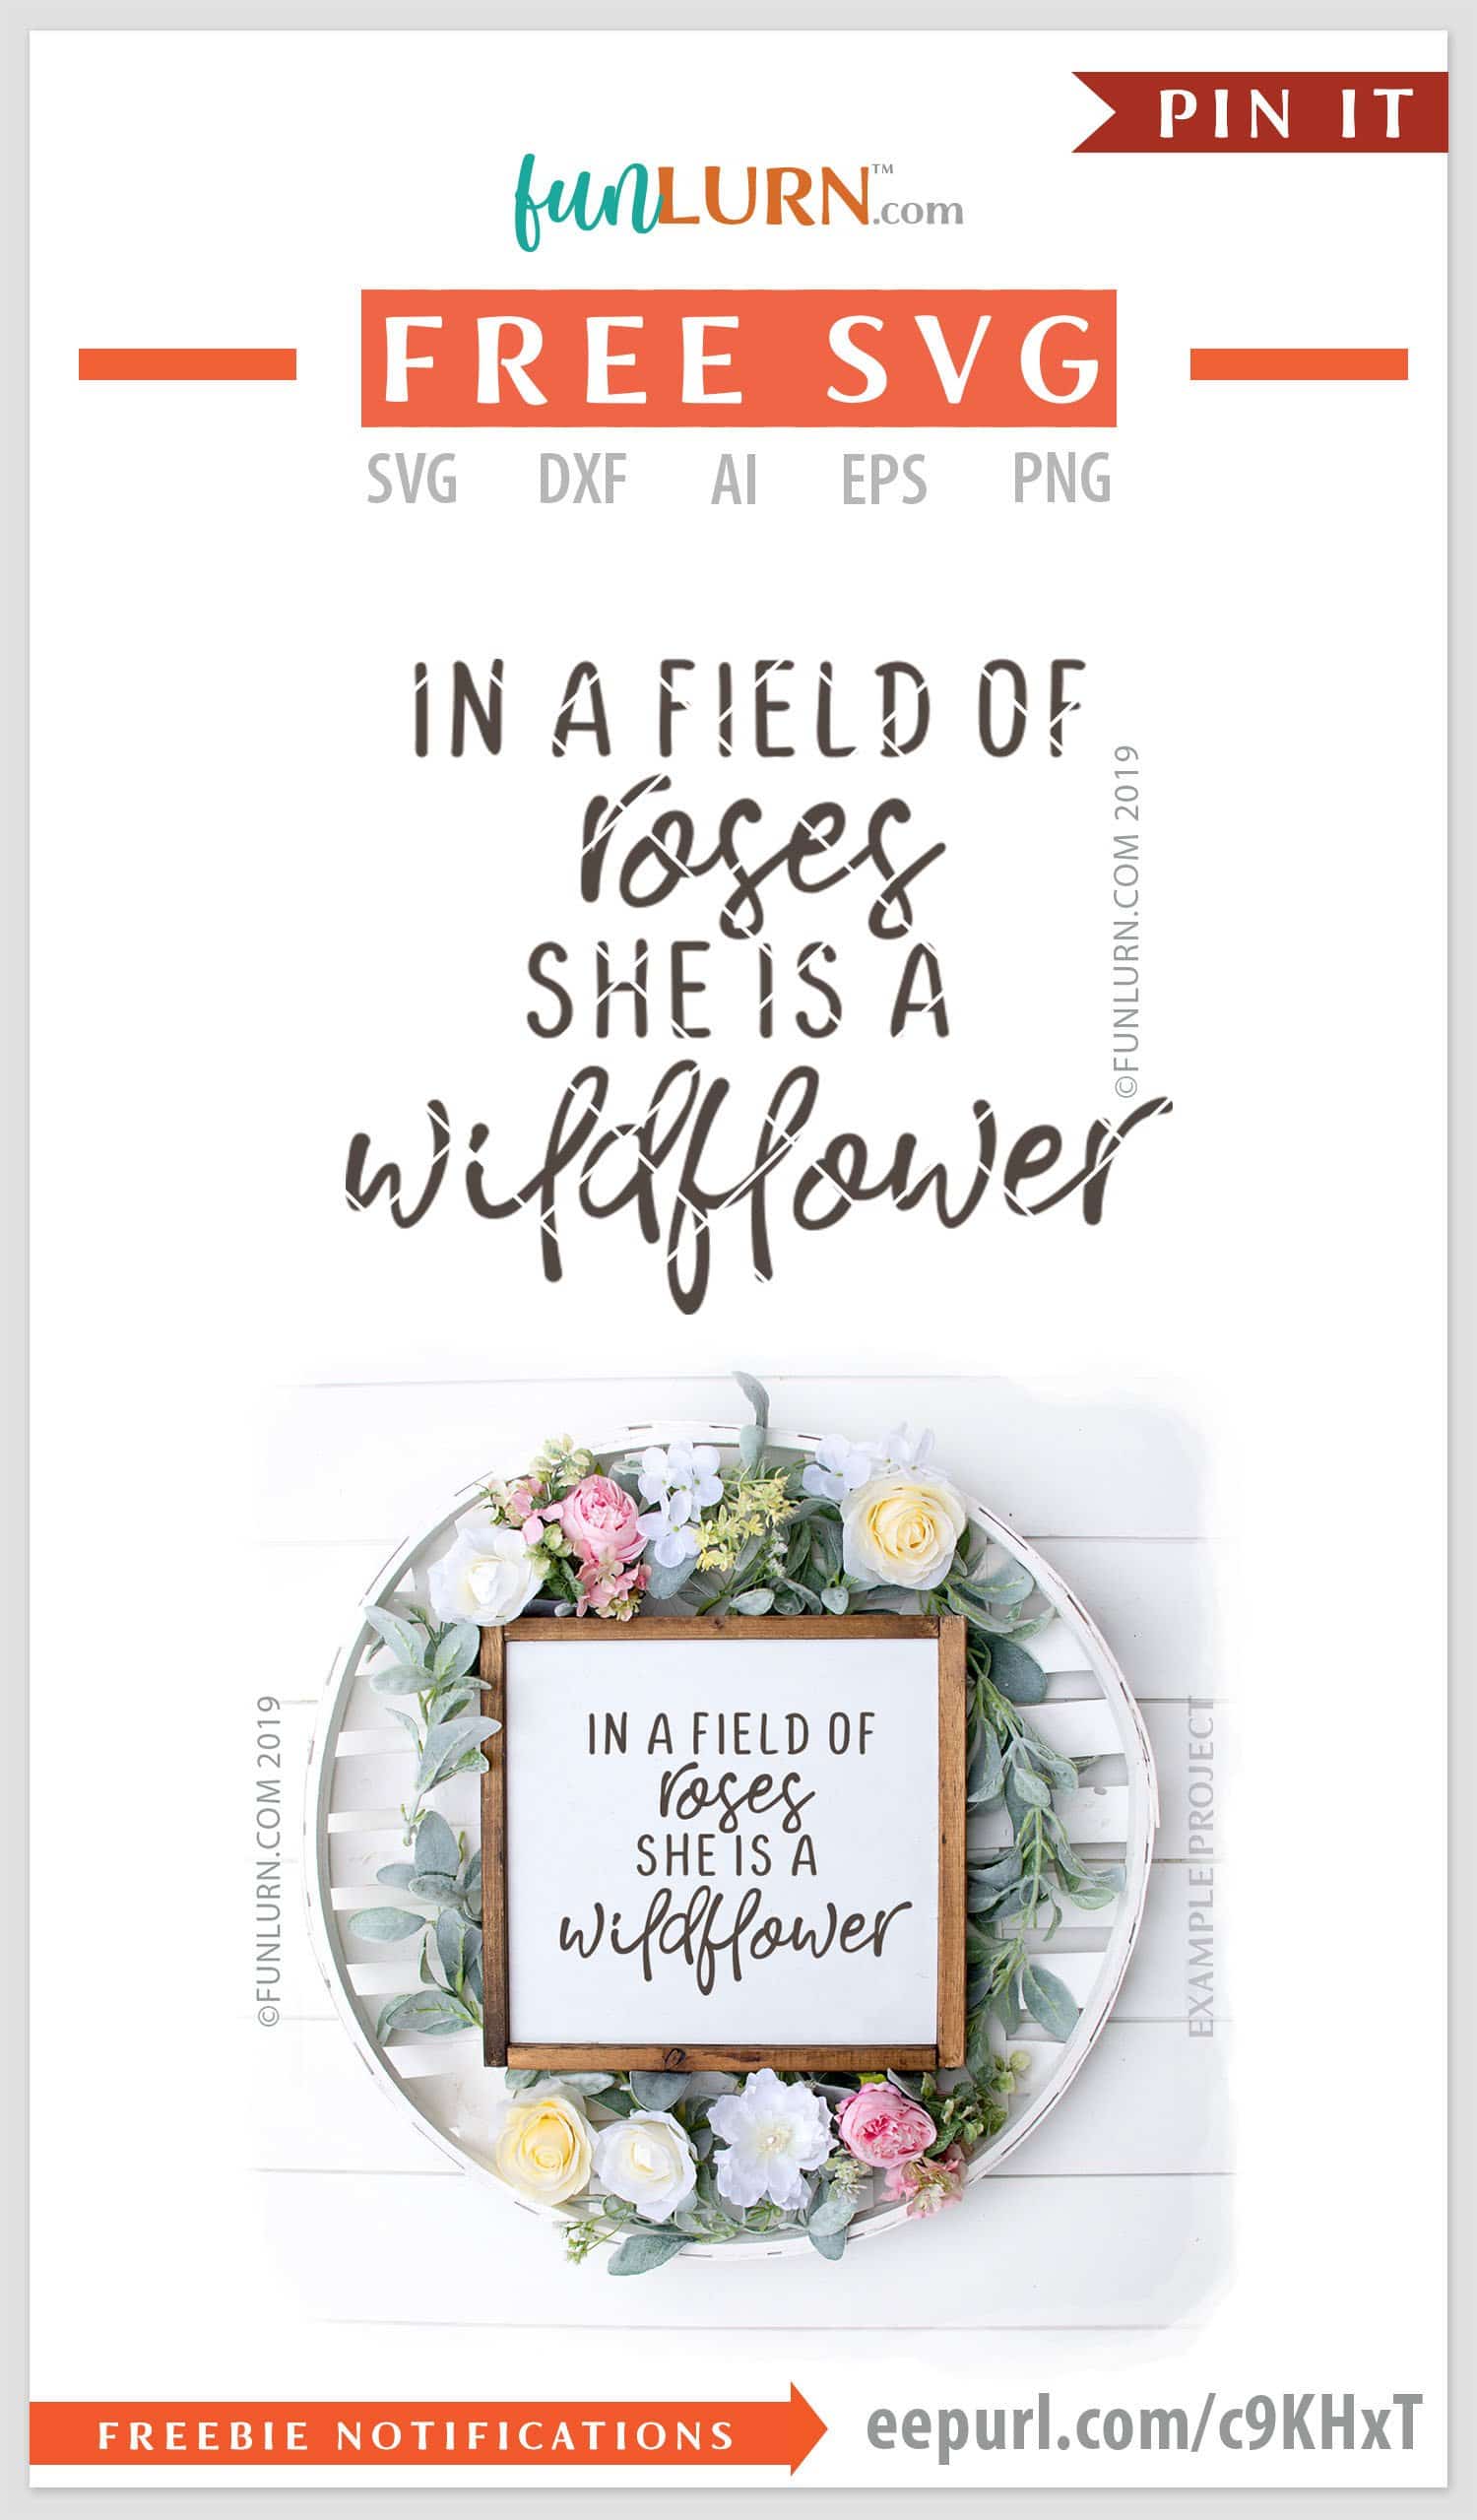 In a field of roses she is a wildflower svg - FunLurn